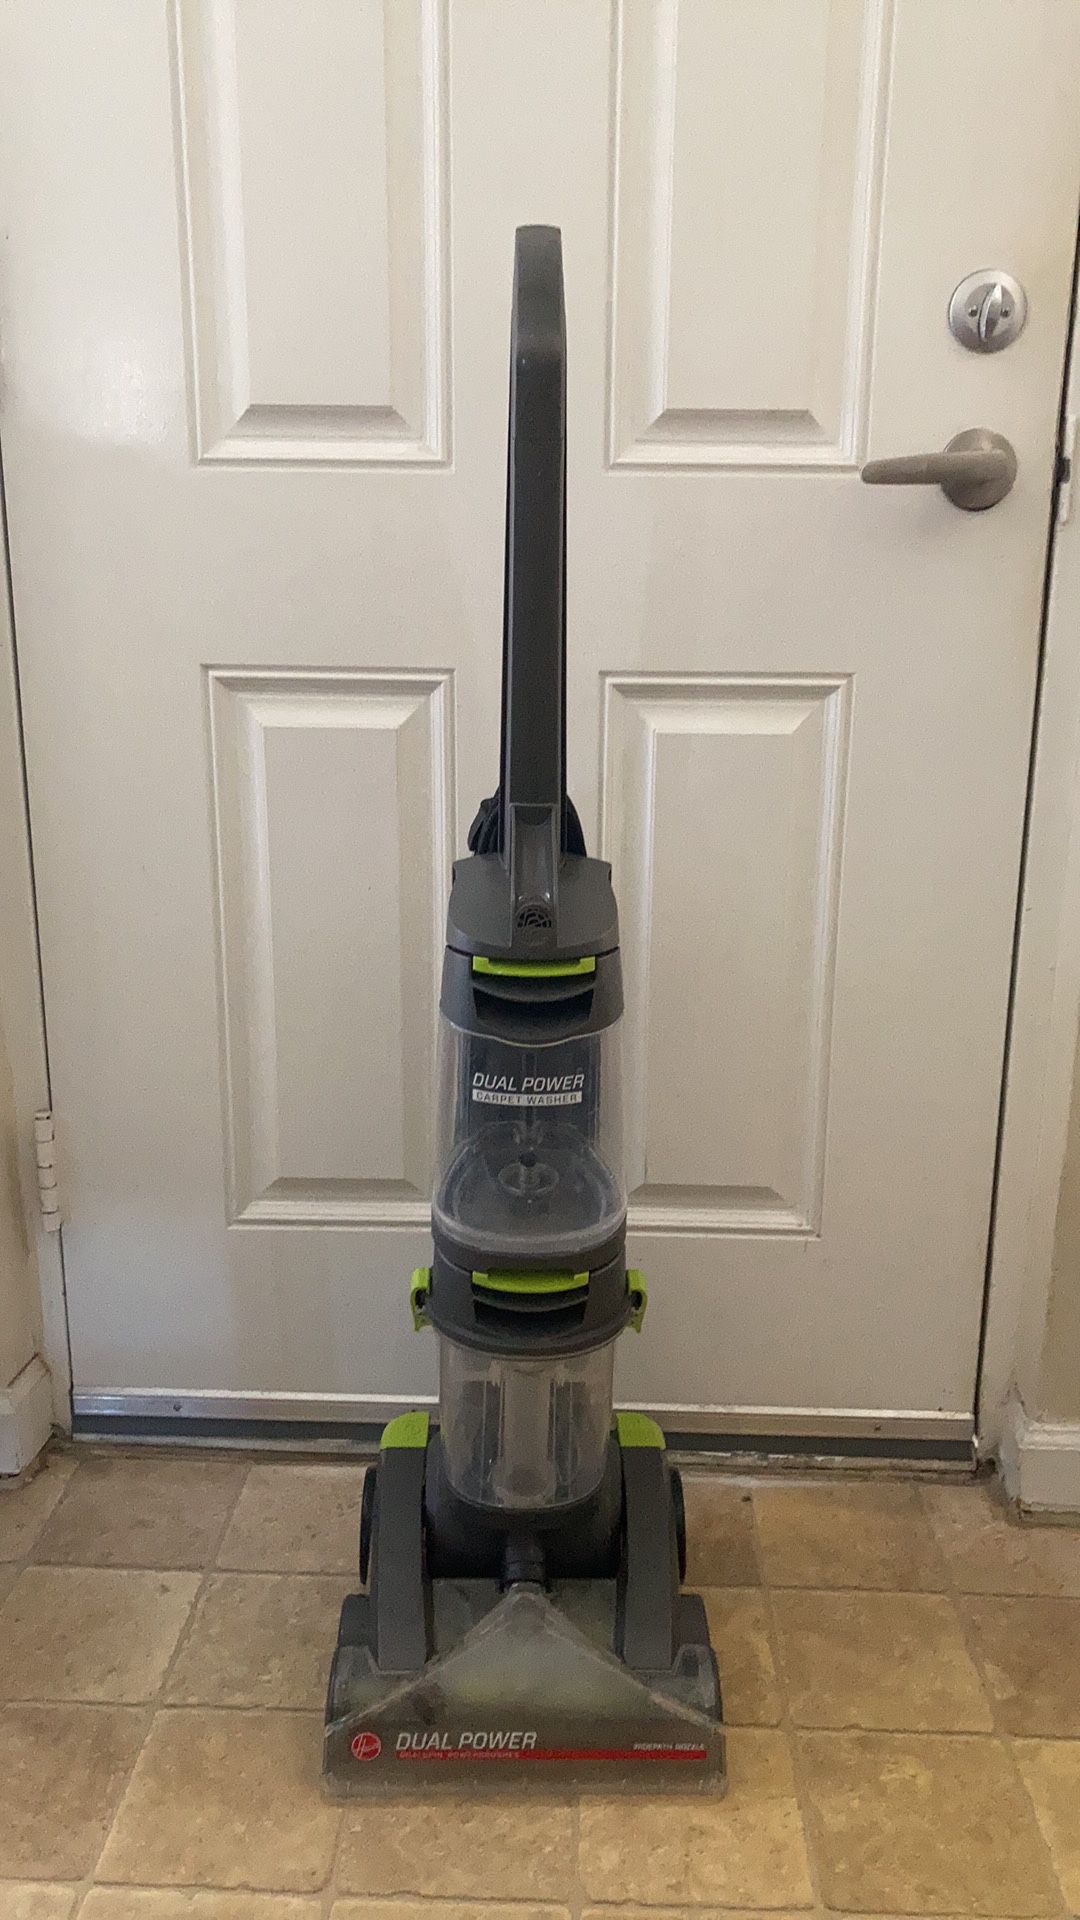 Hoover Dual Power Carpet Cleaner 